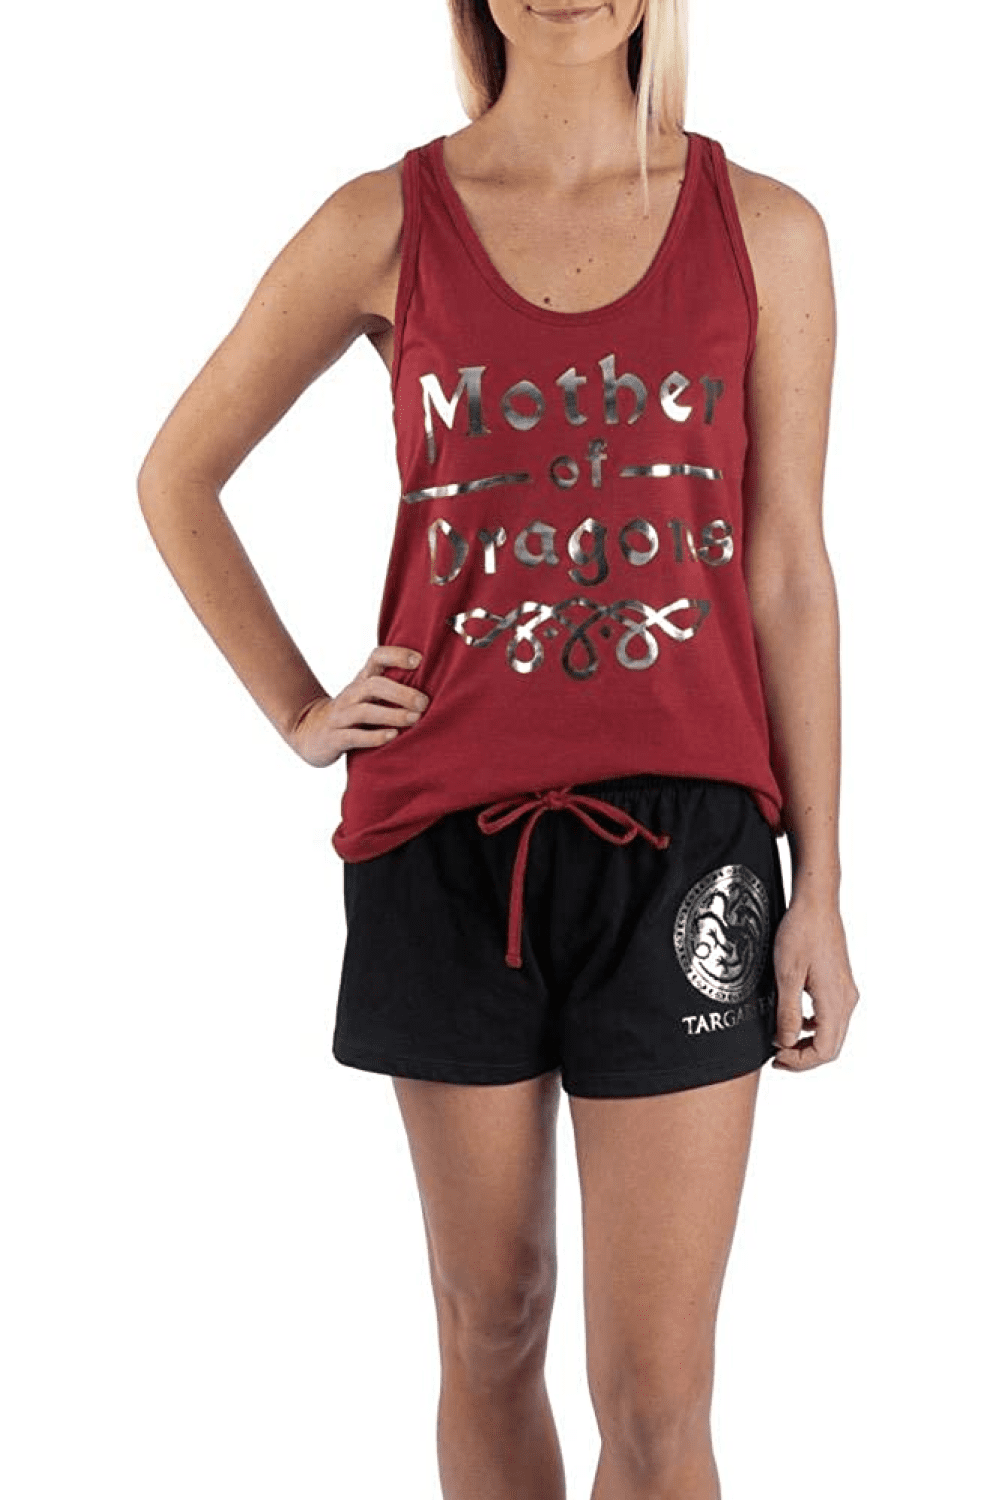 Girl in red Pajama with silver text.